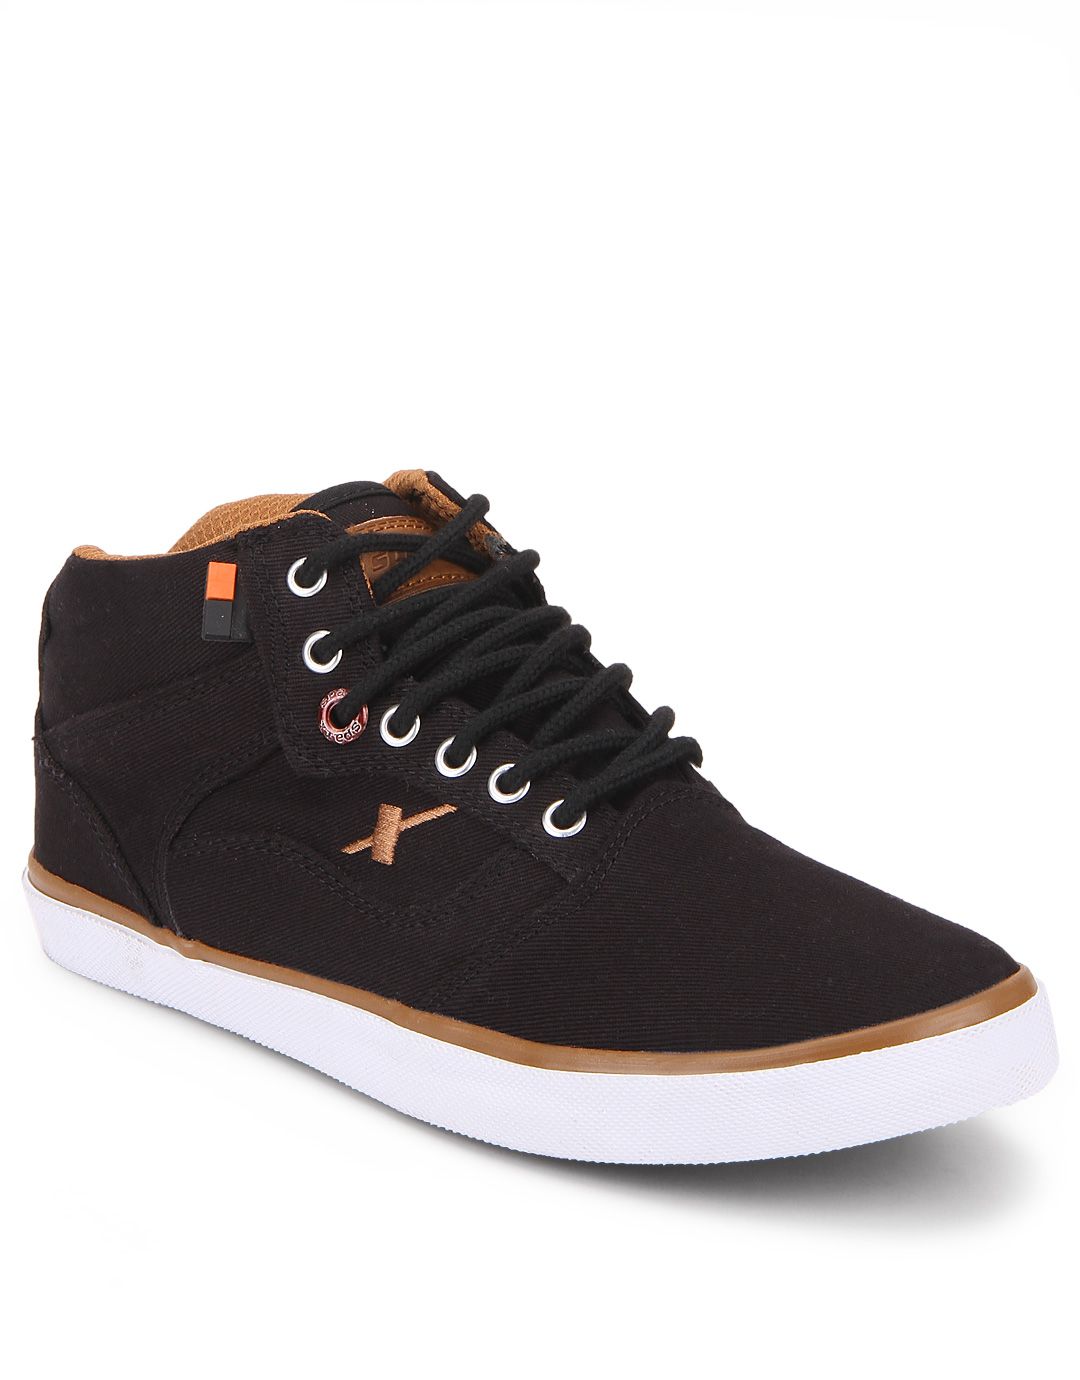 Sparx SM-282 Brown Casual Shoes - Buy 